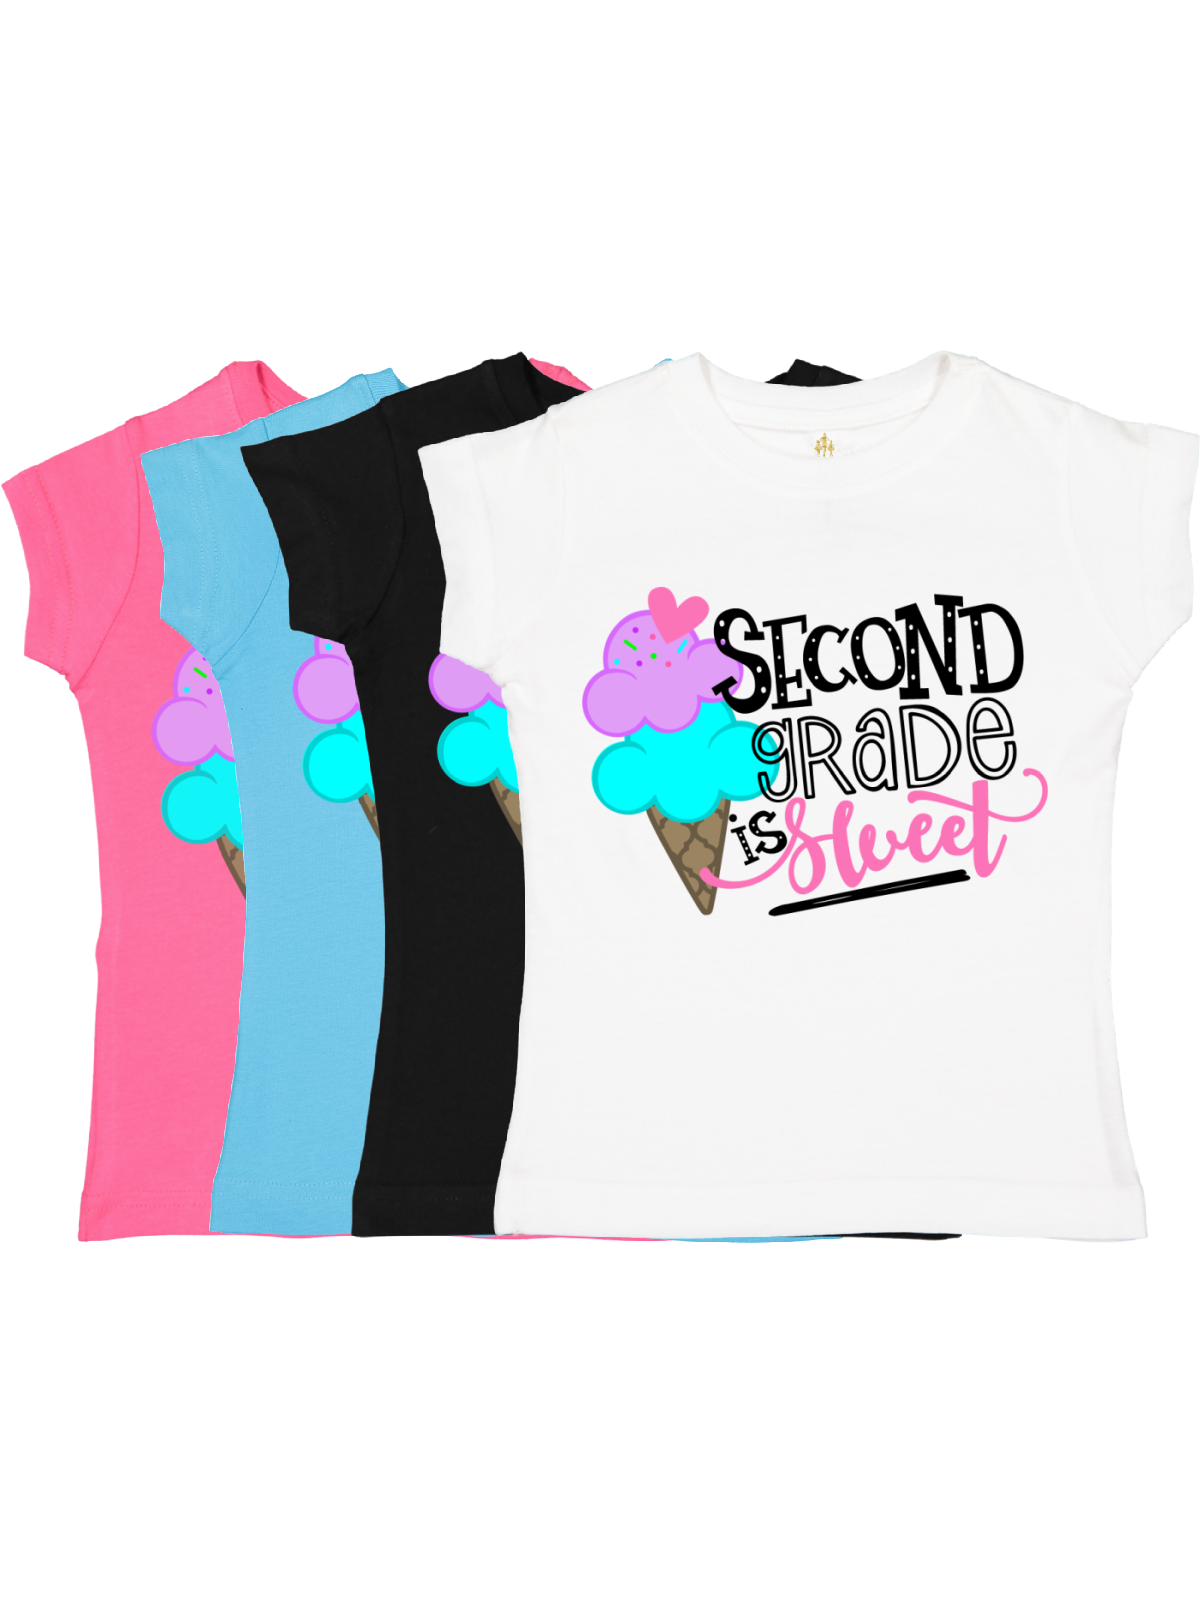 Second Grade is Sweet Girls First Day of School Shirts